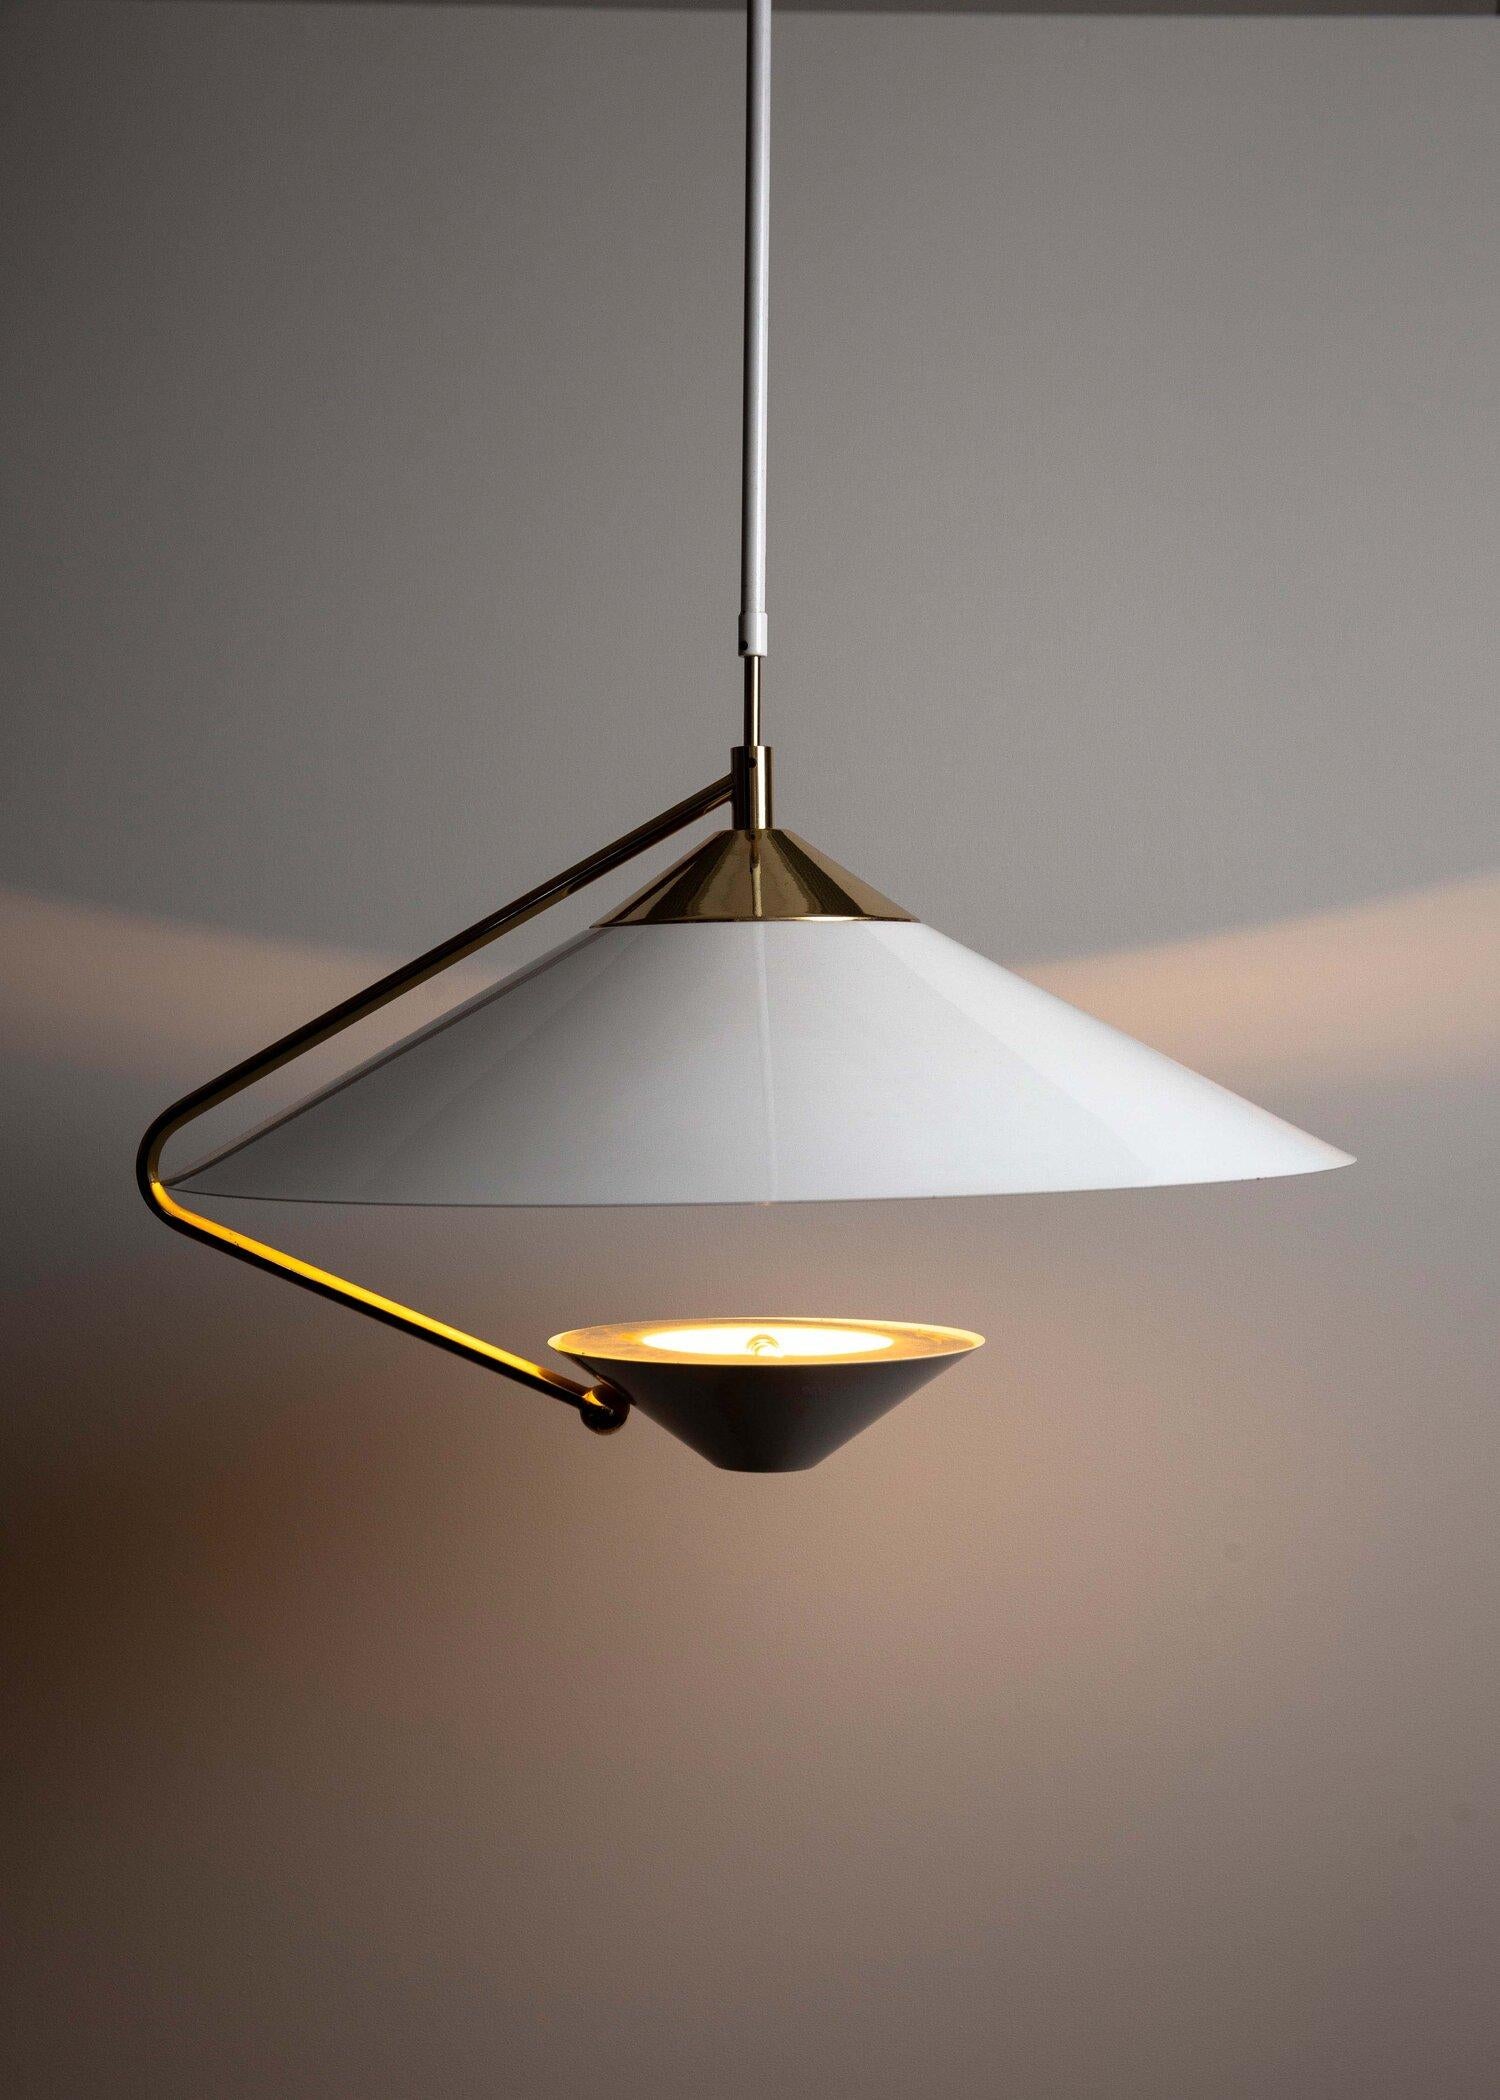 Italian pendant lamp manufactured in the 1960s. White enameled aluminium reflective shade, brass plated arm, white stem and canopy. 150 watts T3 type J 78 mm halogen bulb (no transformer needed).

Measures: HEIGHT: 30 inches (76.2 cm) to ceiling /